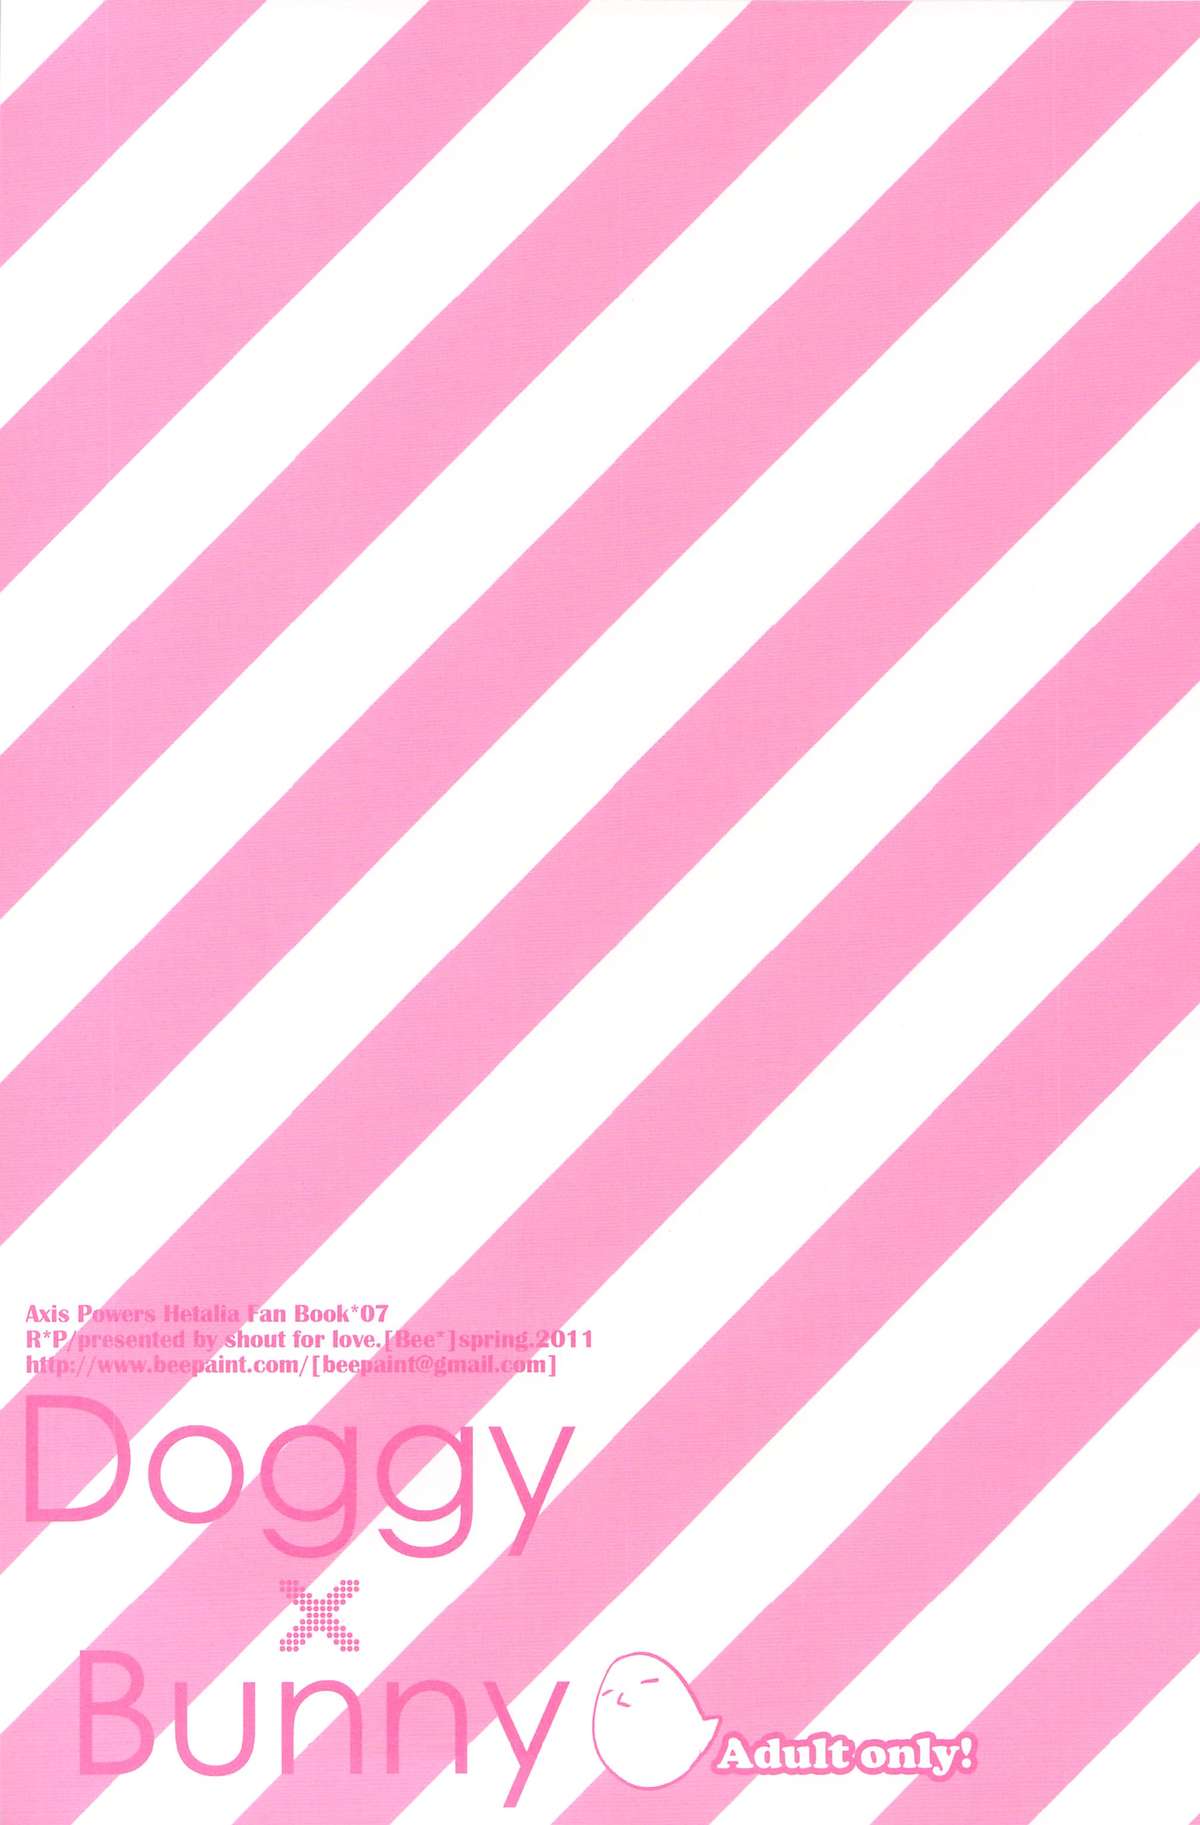 [Shout for Love (Bee)] Doddy Bunny (Hetalia) page 4 full